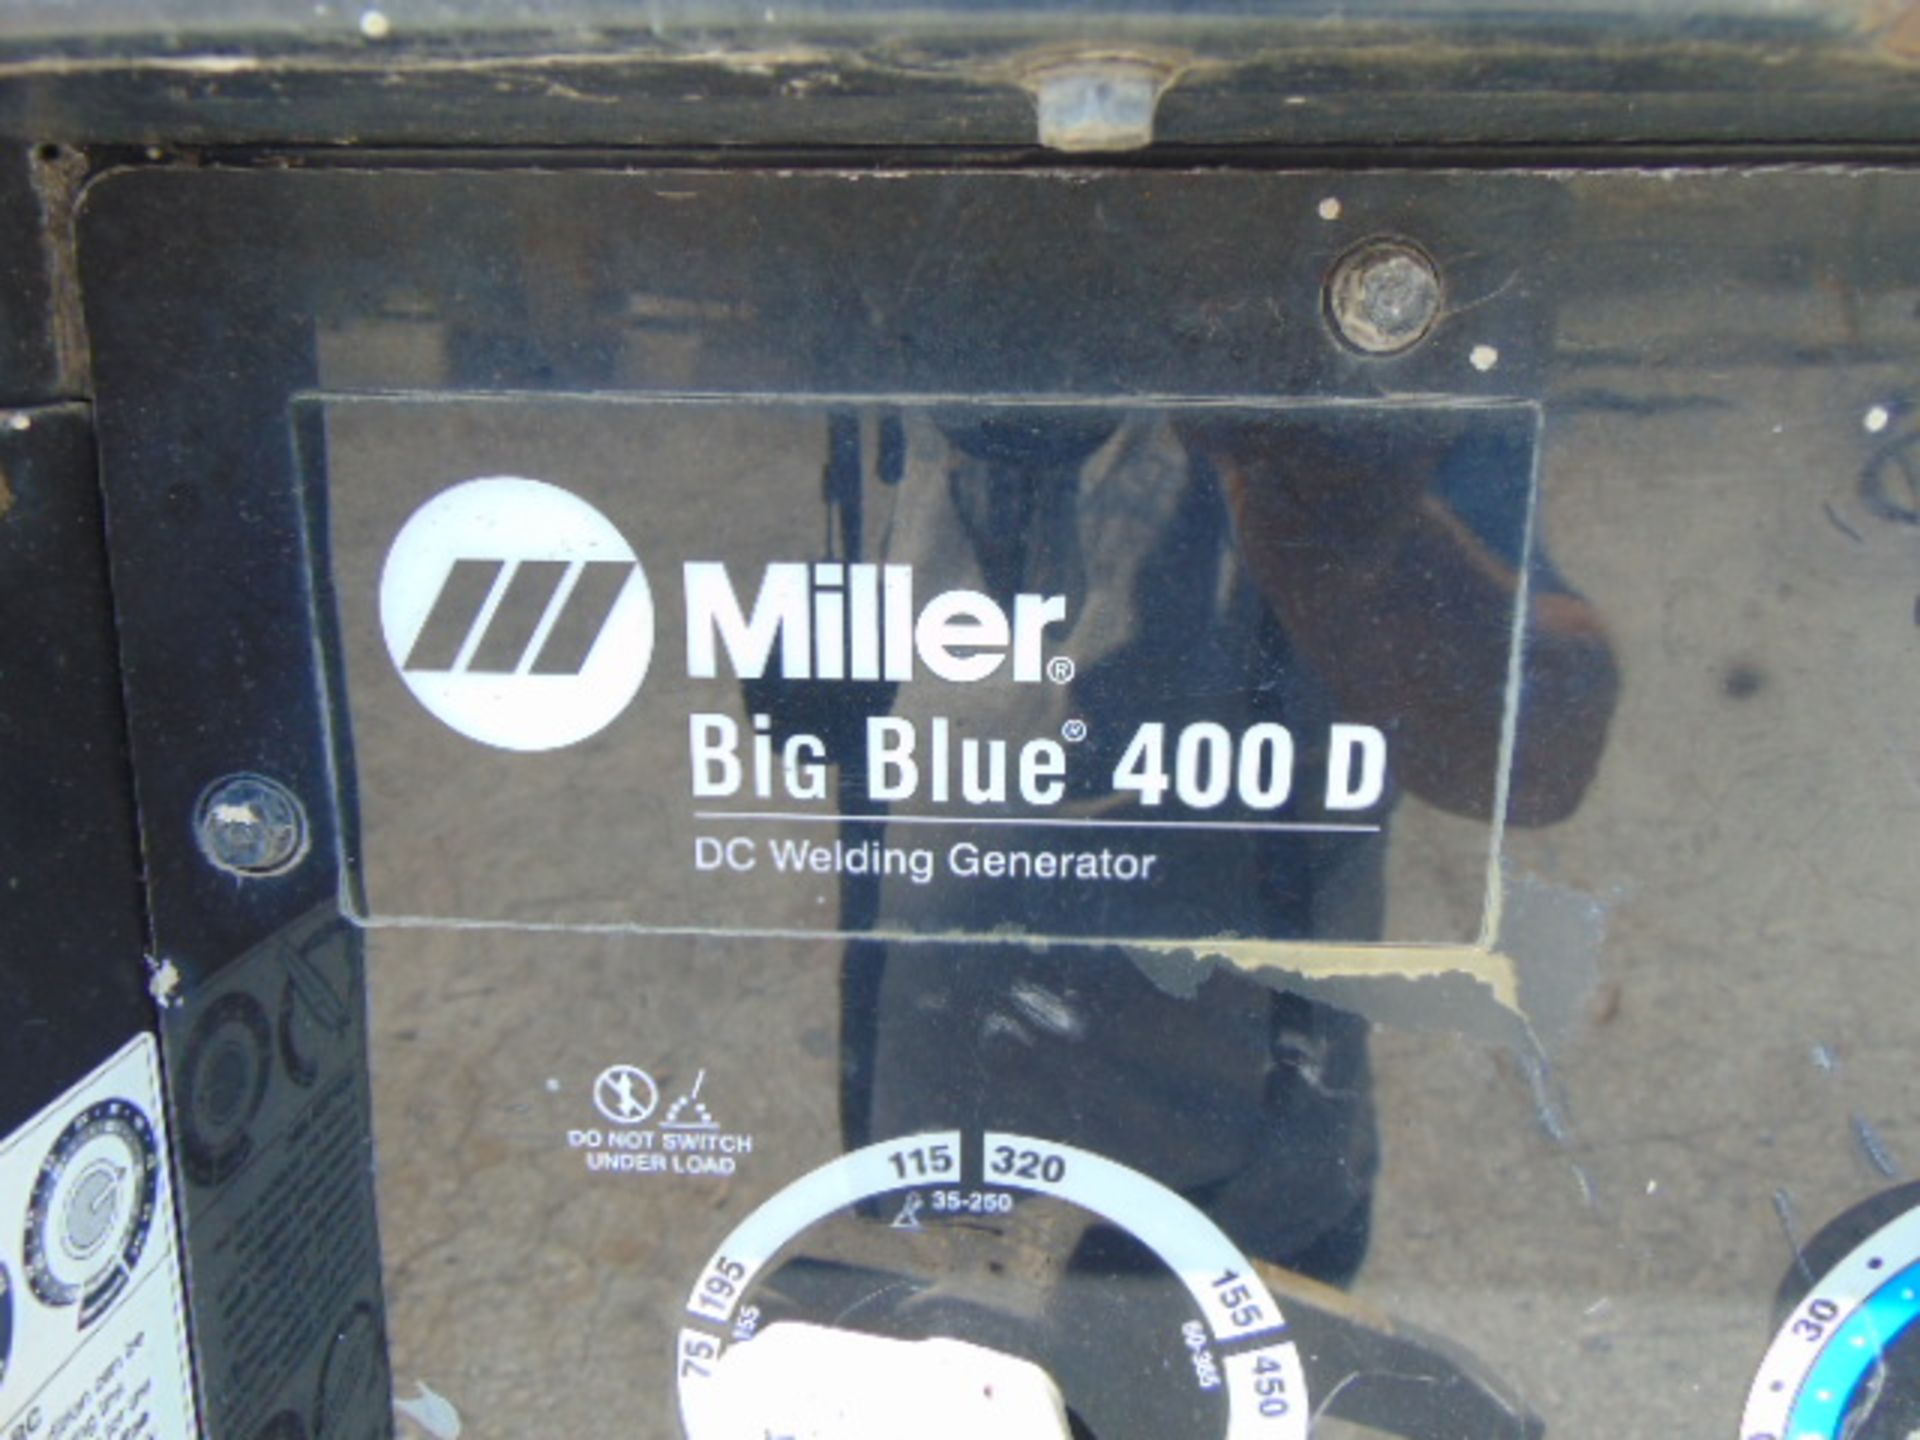 PORTABLE WELDING GENERATOR, MILLER MDL. BIG BLUE 400D DC, 450 amps output, capable of MIG, STICK & - Image 4 of 7